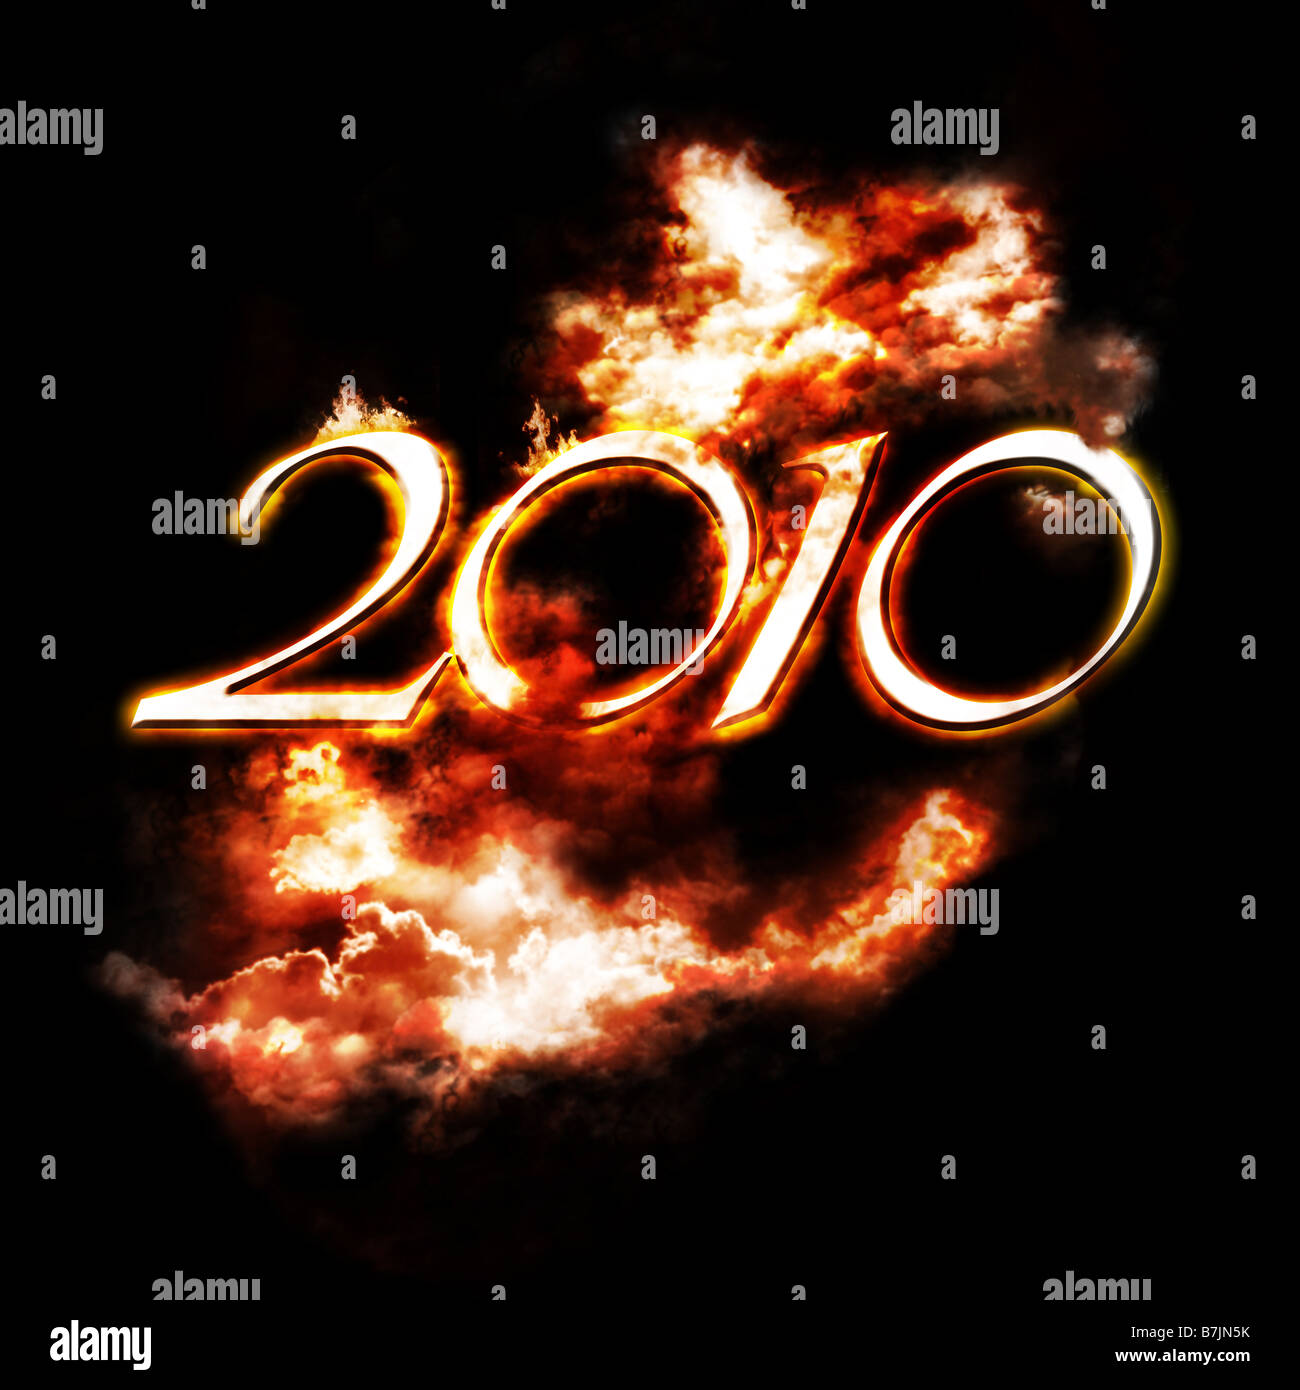 the year 2010 is comming soon Stock Photo